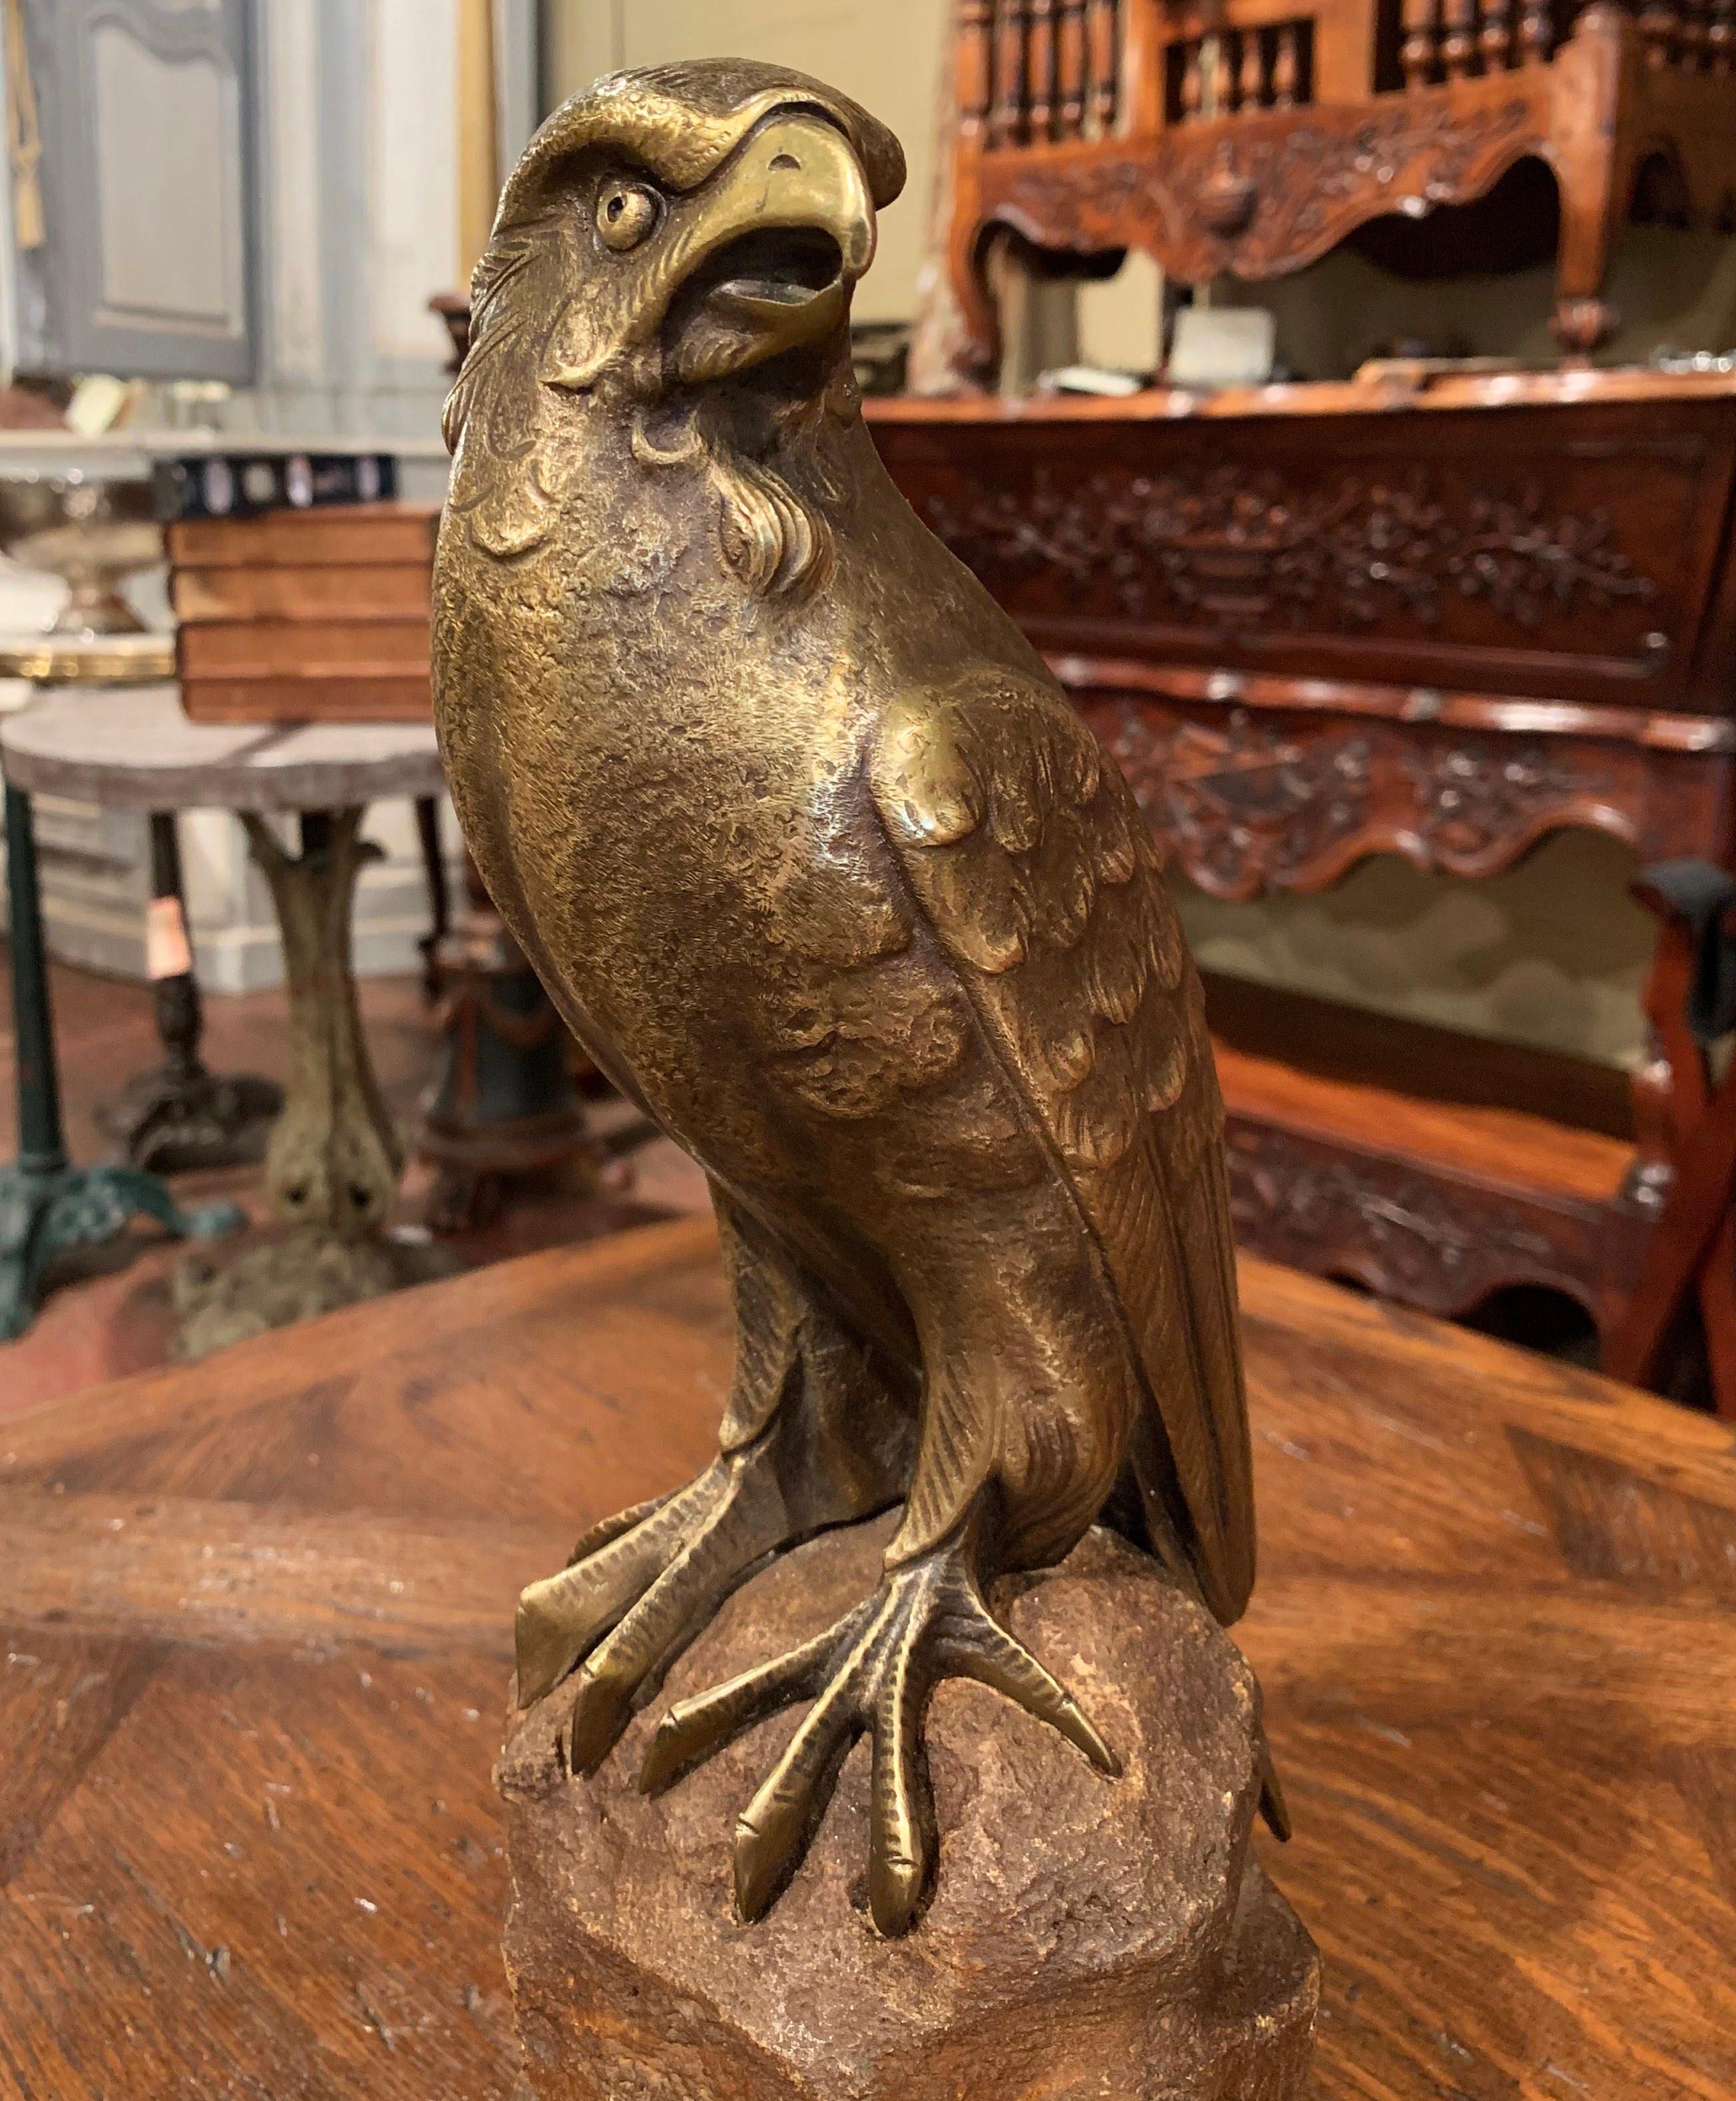 Decorate a shelf or a man's desk with this stately antique bird sculpture on stand. Crafted in France circa 1880, the carved sculpture features a picturesque bronze eagle standing proudly on a rock made of stone. The realistic avian figure has